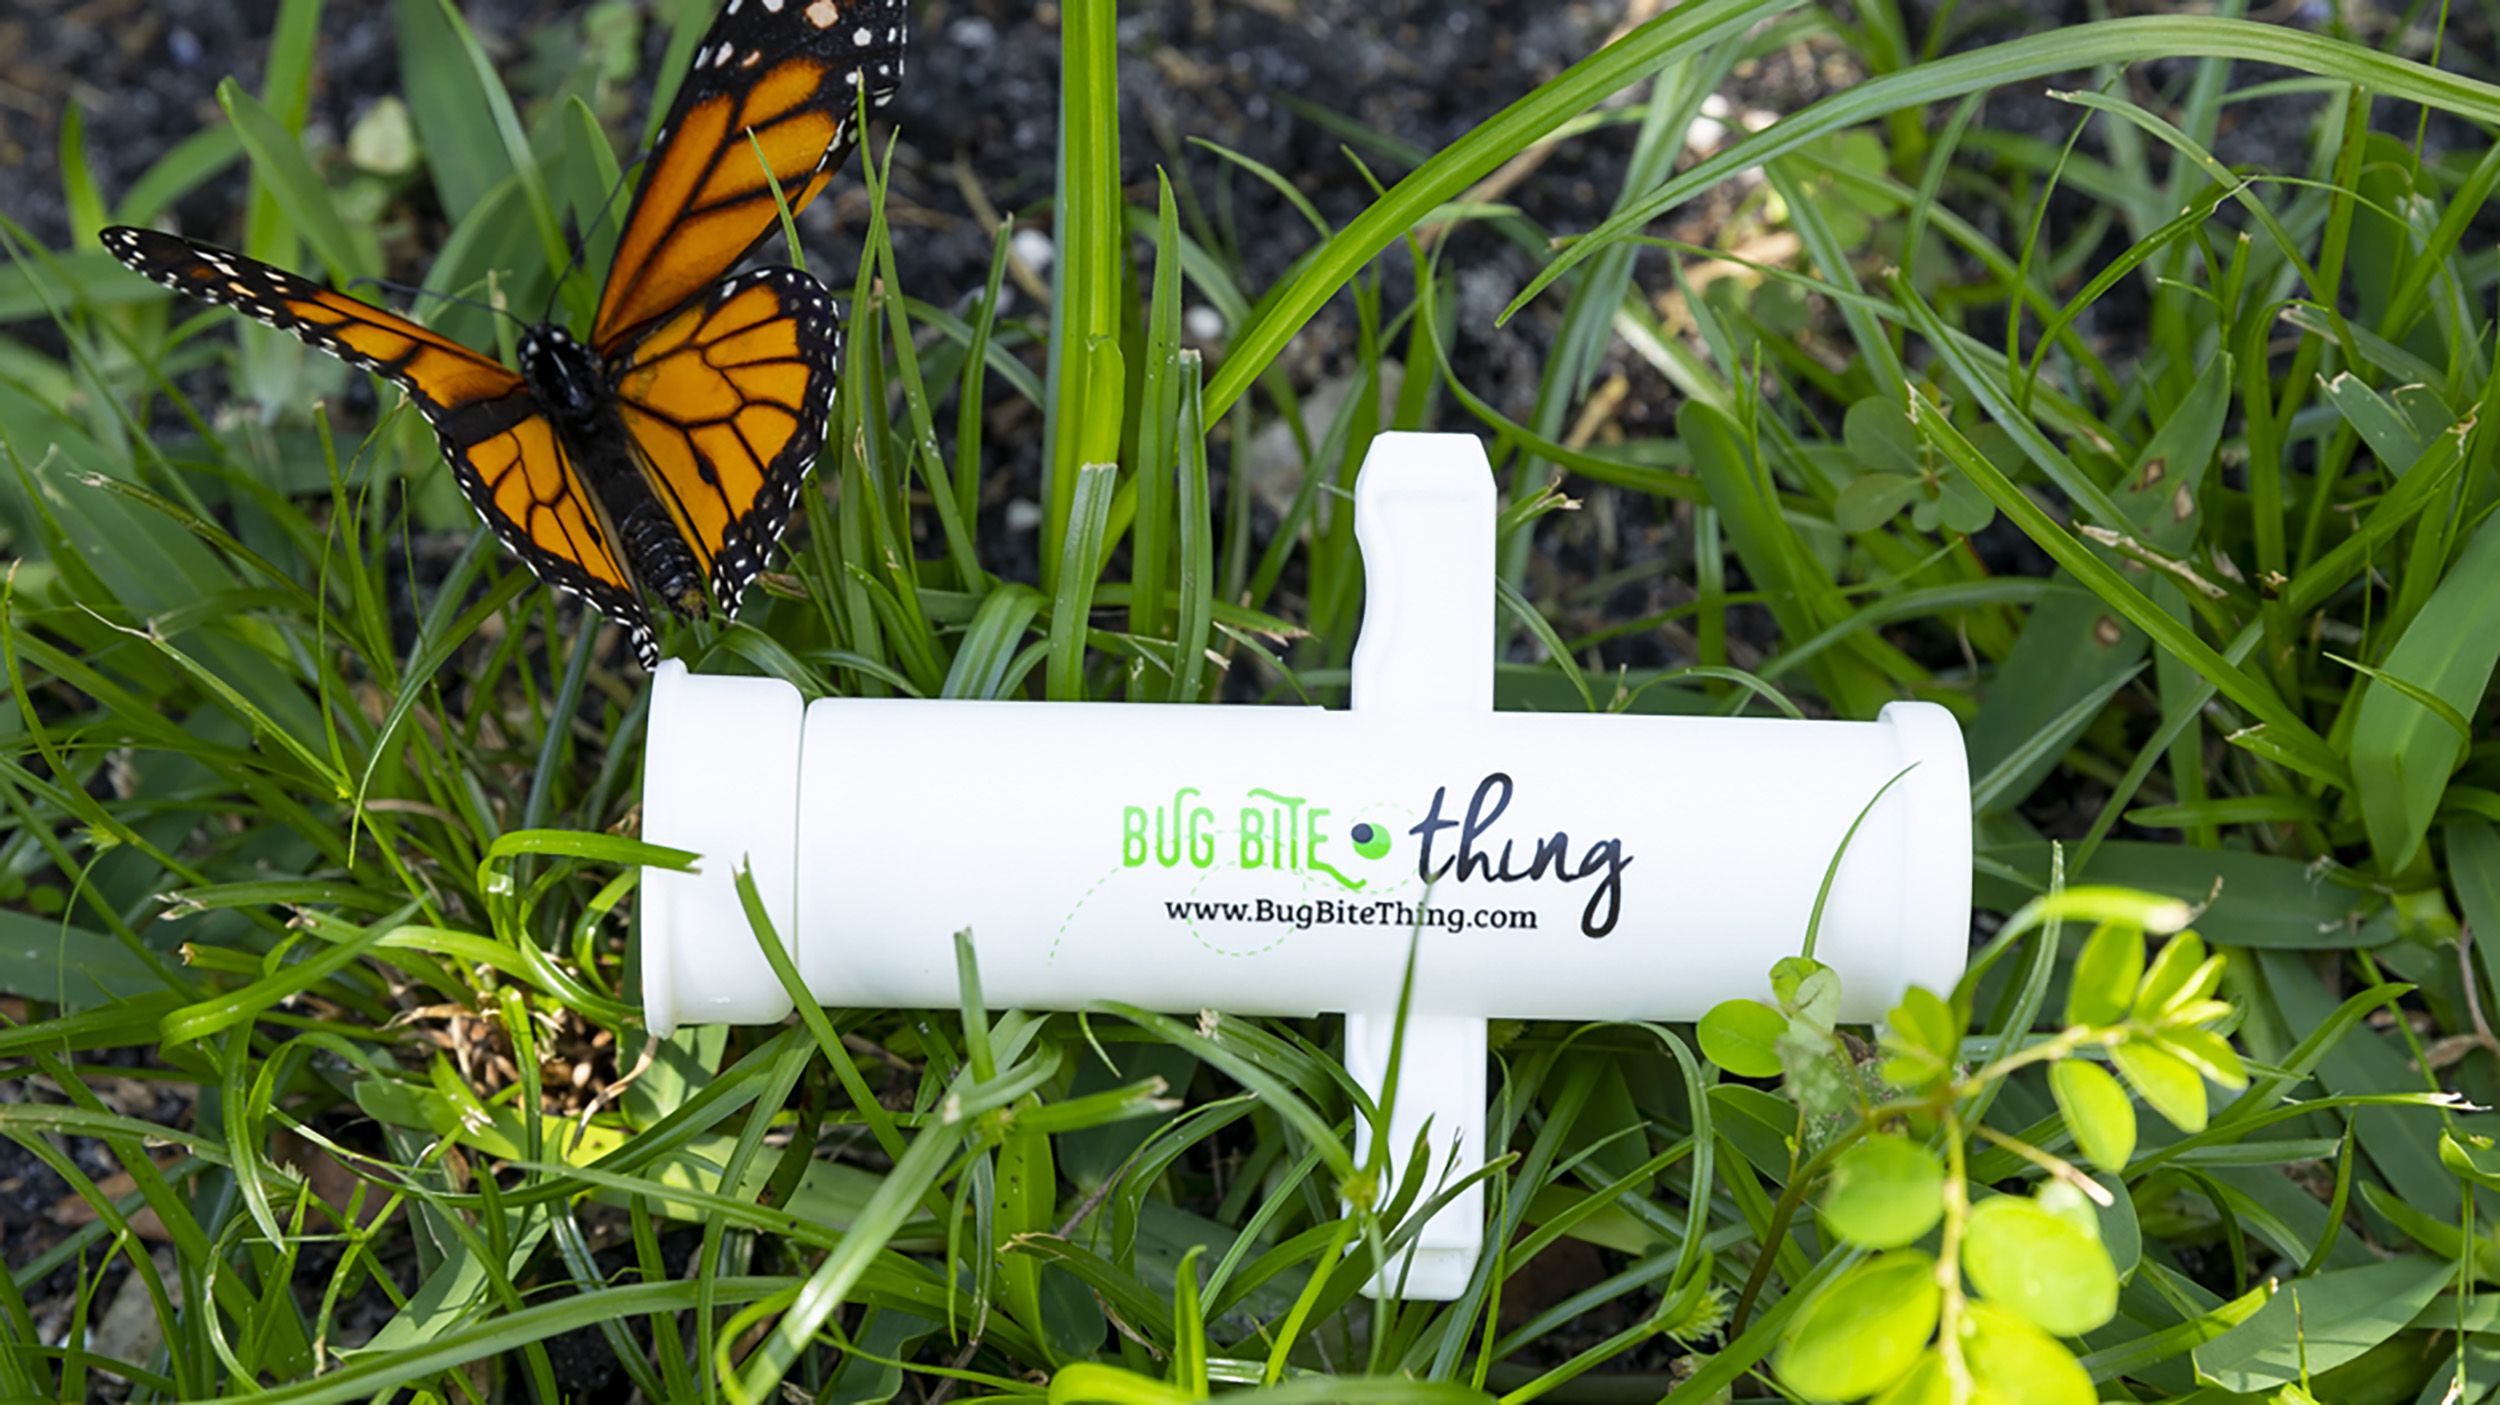 Bug Bite Thing review: This treatment can provide instant itch